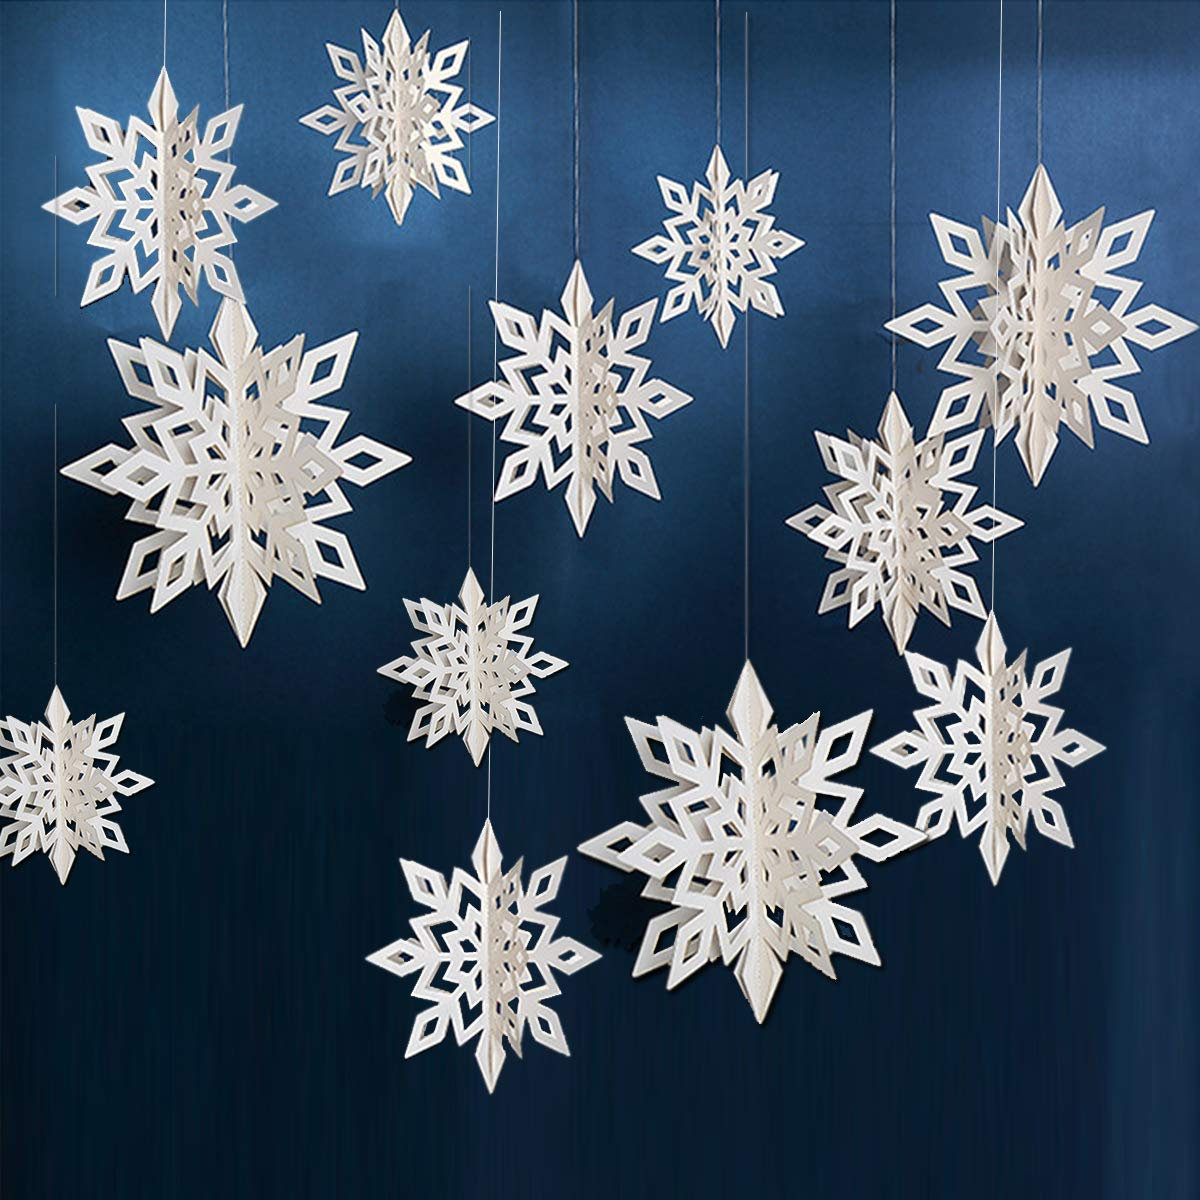 6 Pieces Hanging Snowflake Decorations Ornaments 3D Large White Paper Snowflakes Garland Snow Flakes for Christmas Tree Wedding Holiday New Year Room